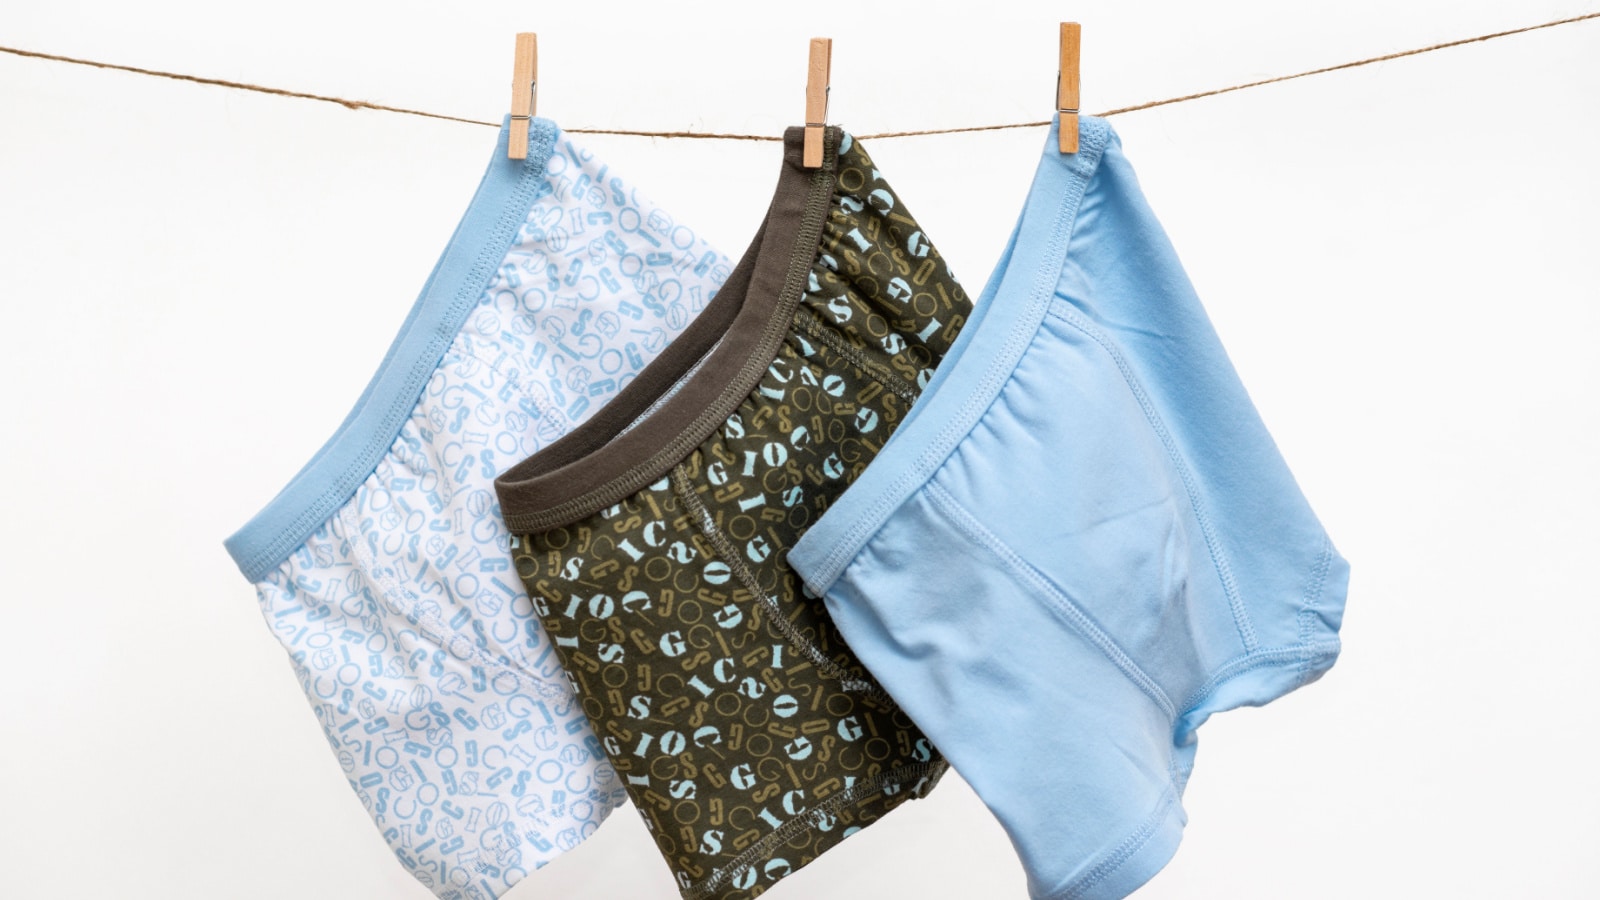 Male (boy) brief boxers hanging on the clothesline isolated on a white background